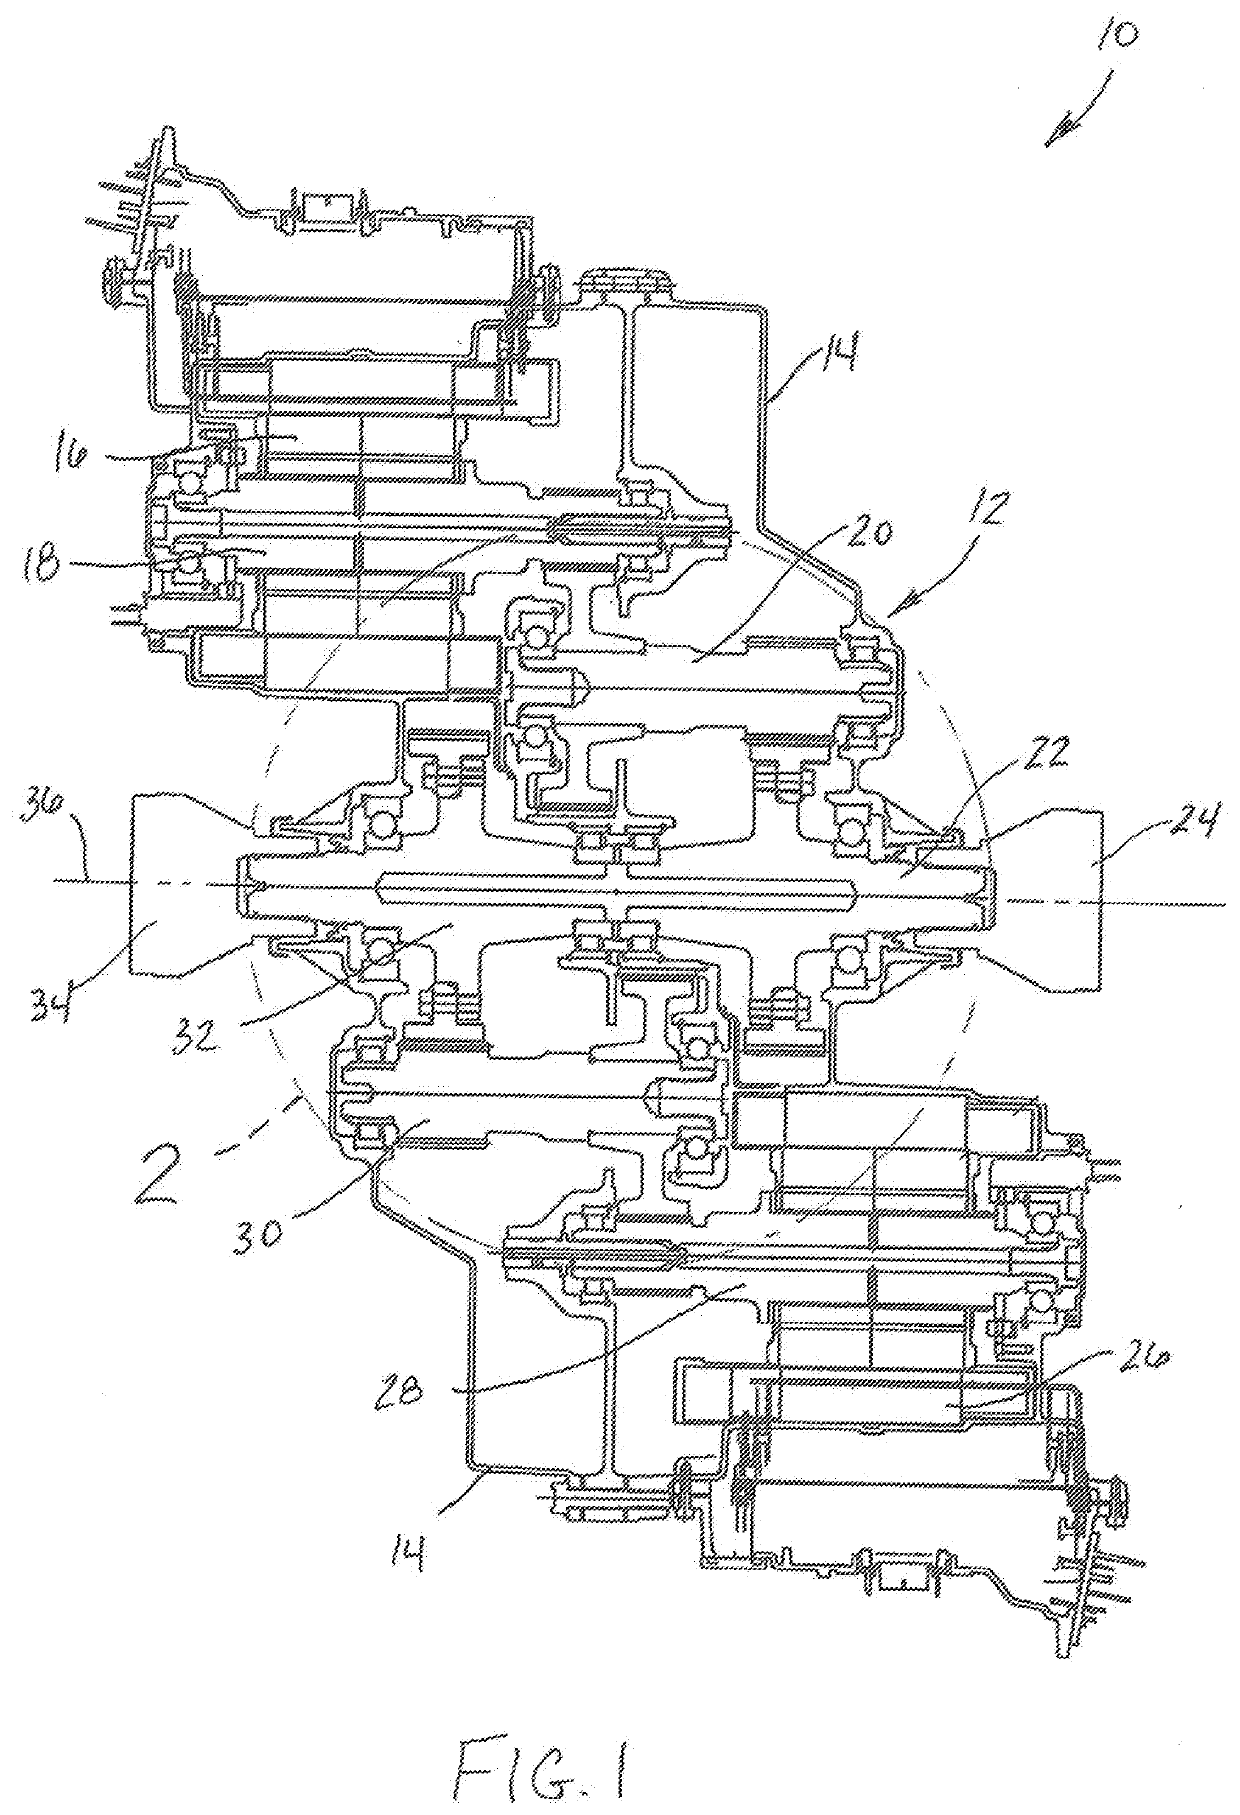 Bearing and shaft arrangement for electric drive unit